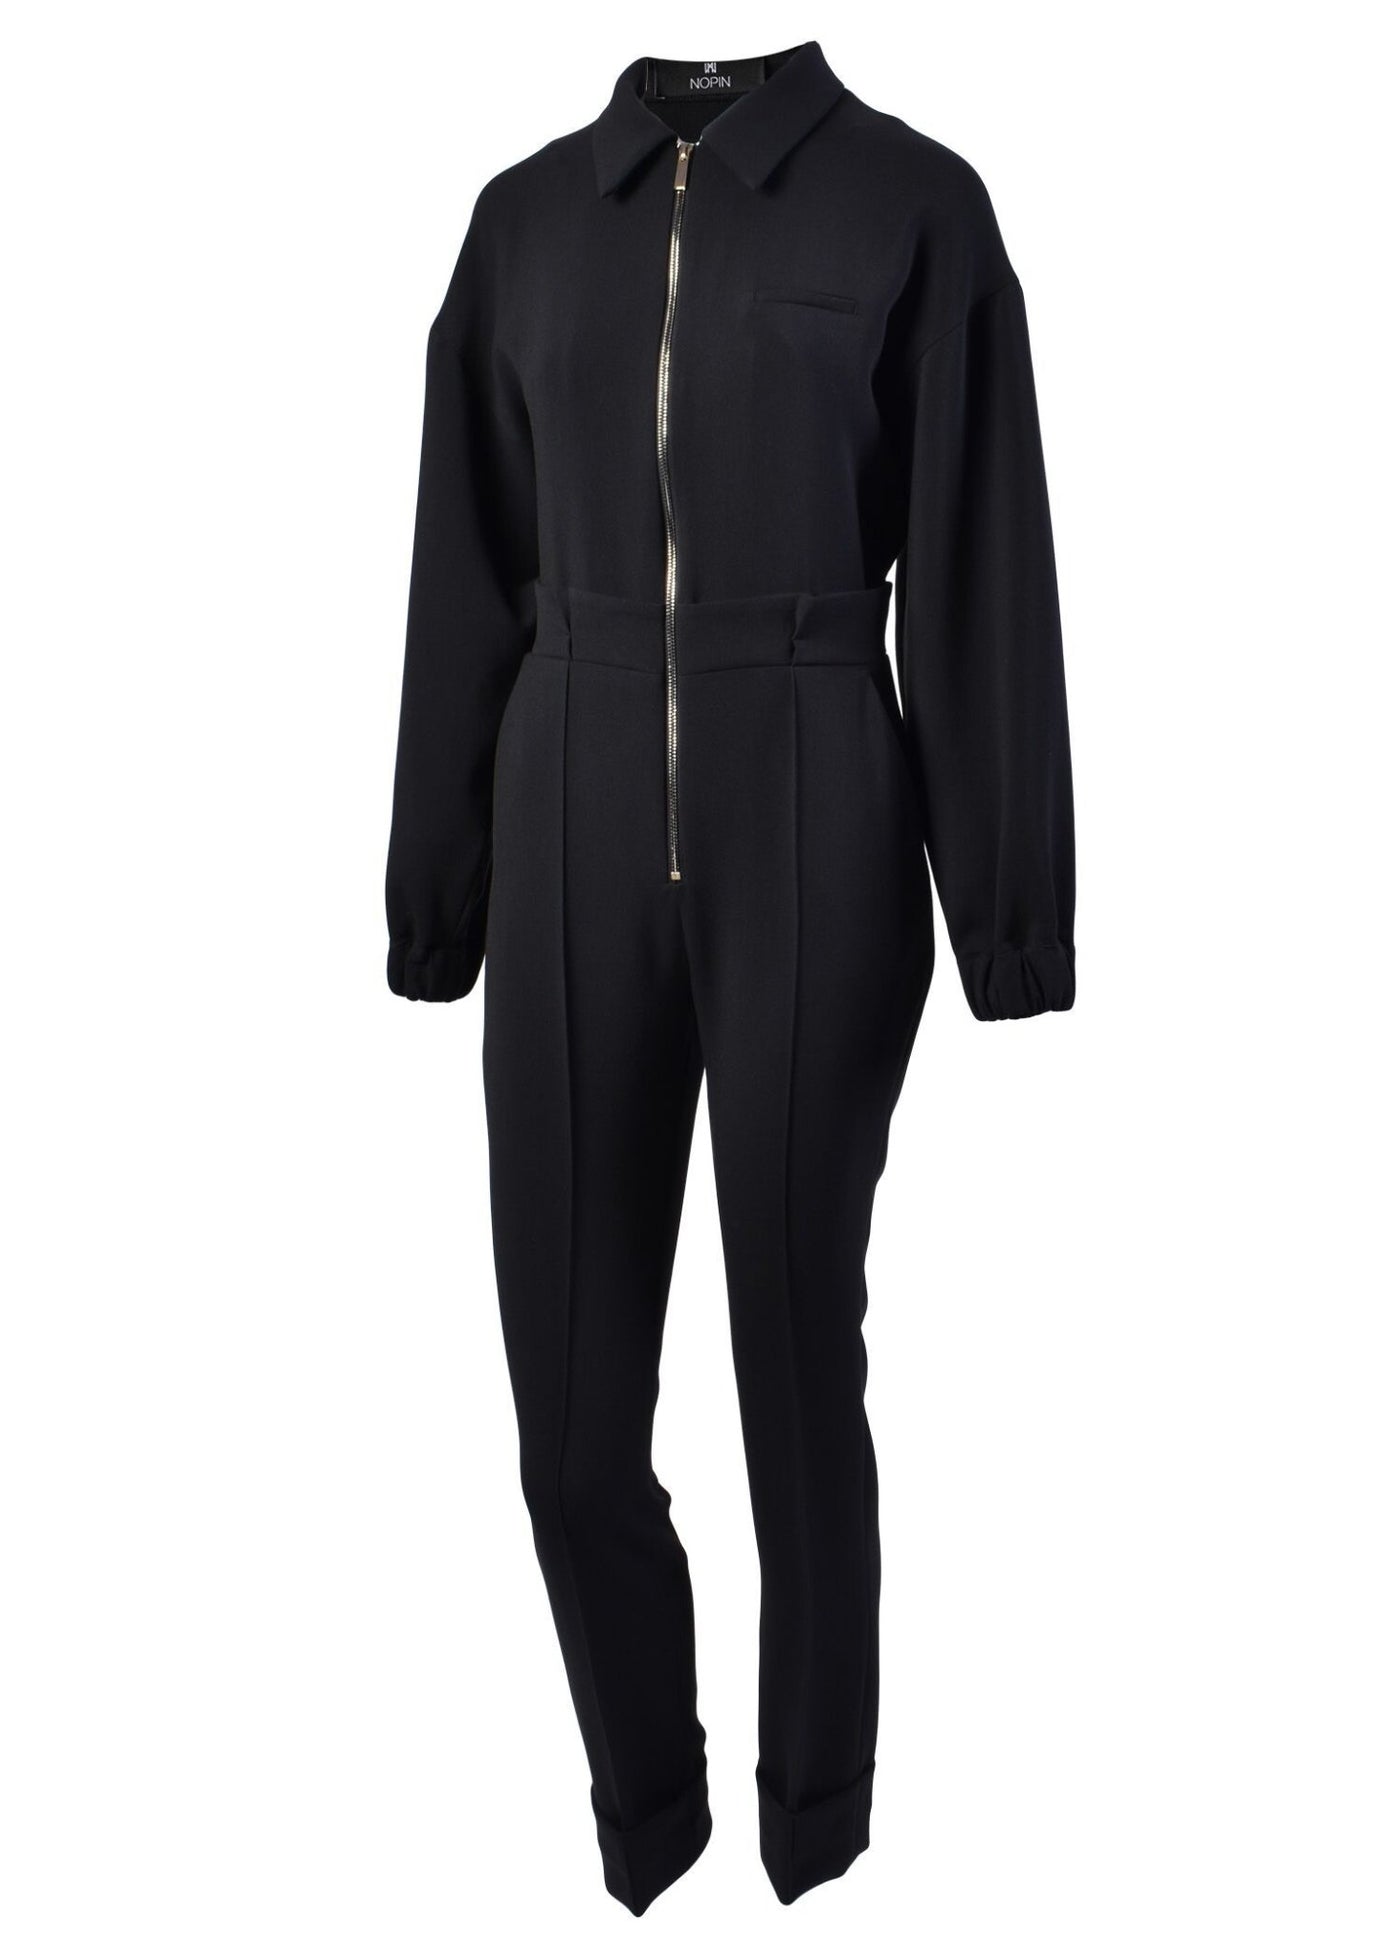 Jumpsuit with zip - The Clothing LoungeNOPIN